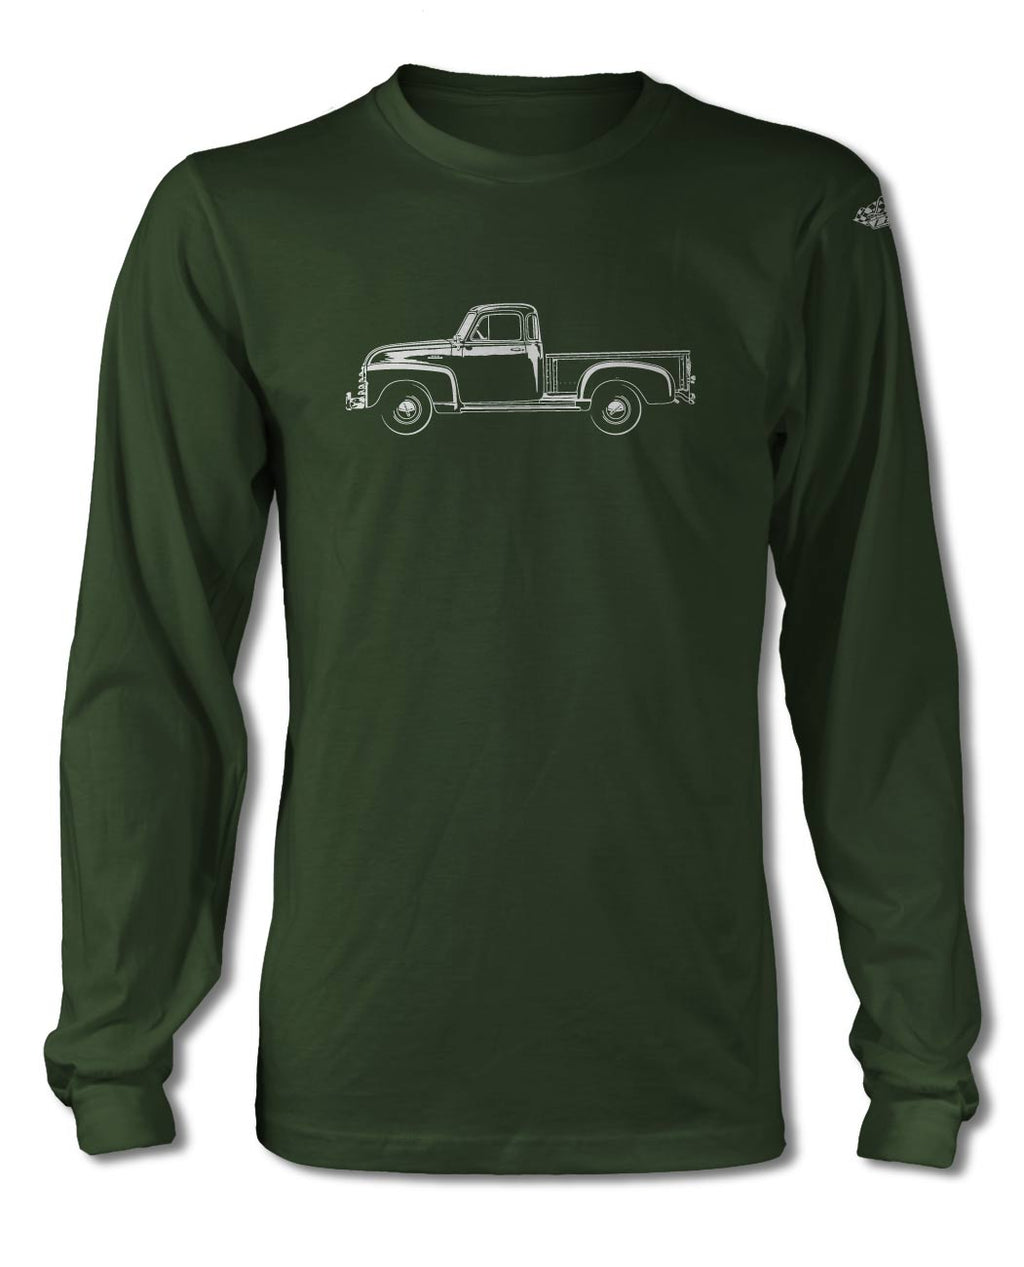 1951 - 1954 Chevrolet Pickup 3100 T-Shirt - Long Sleeves - Side View